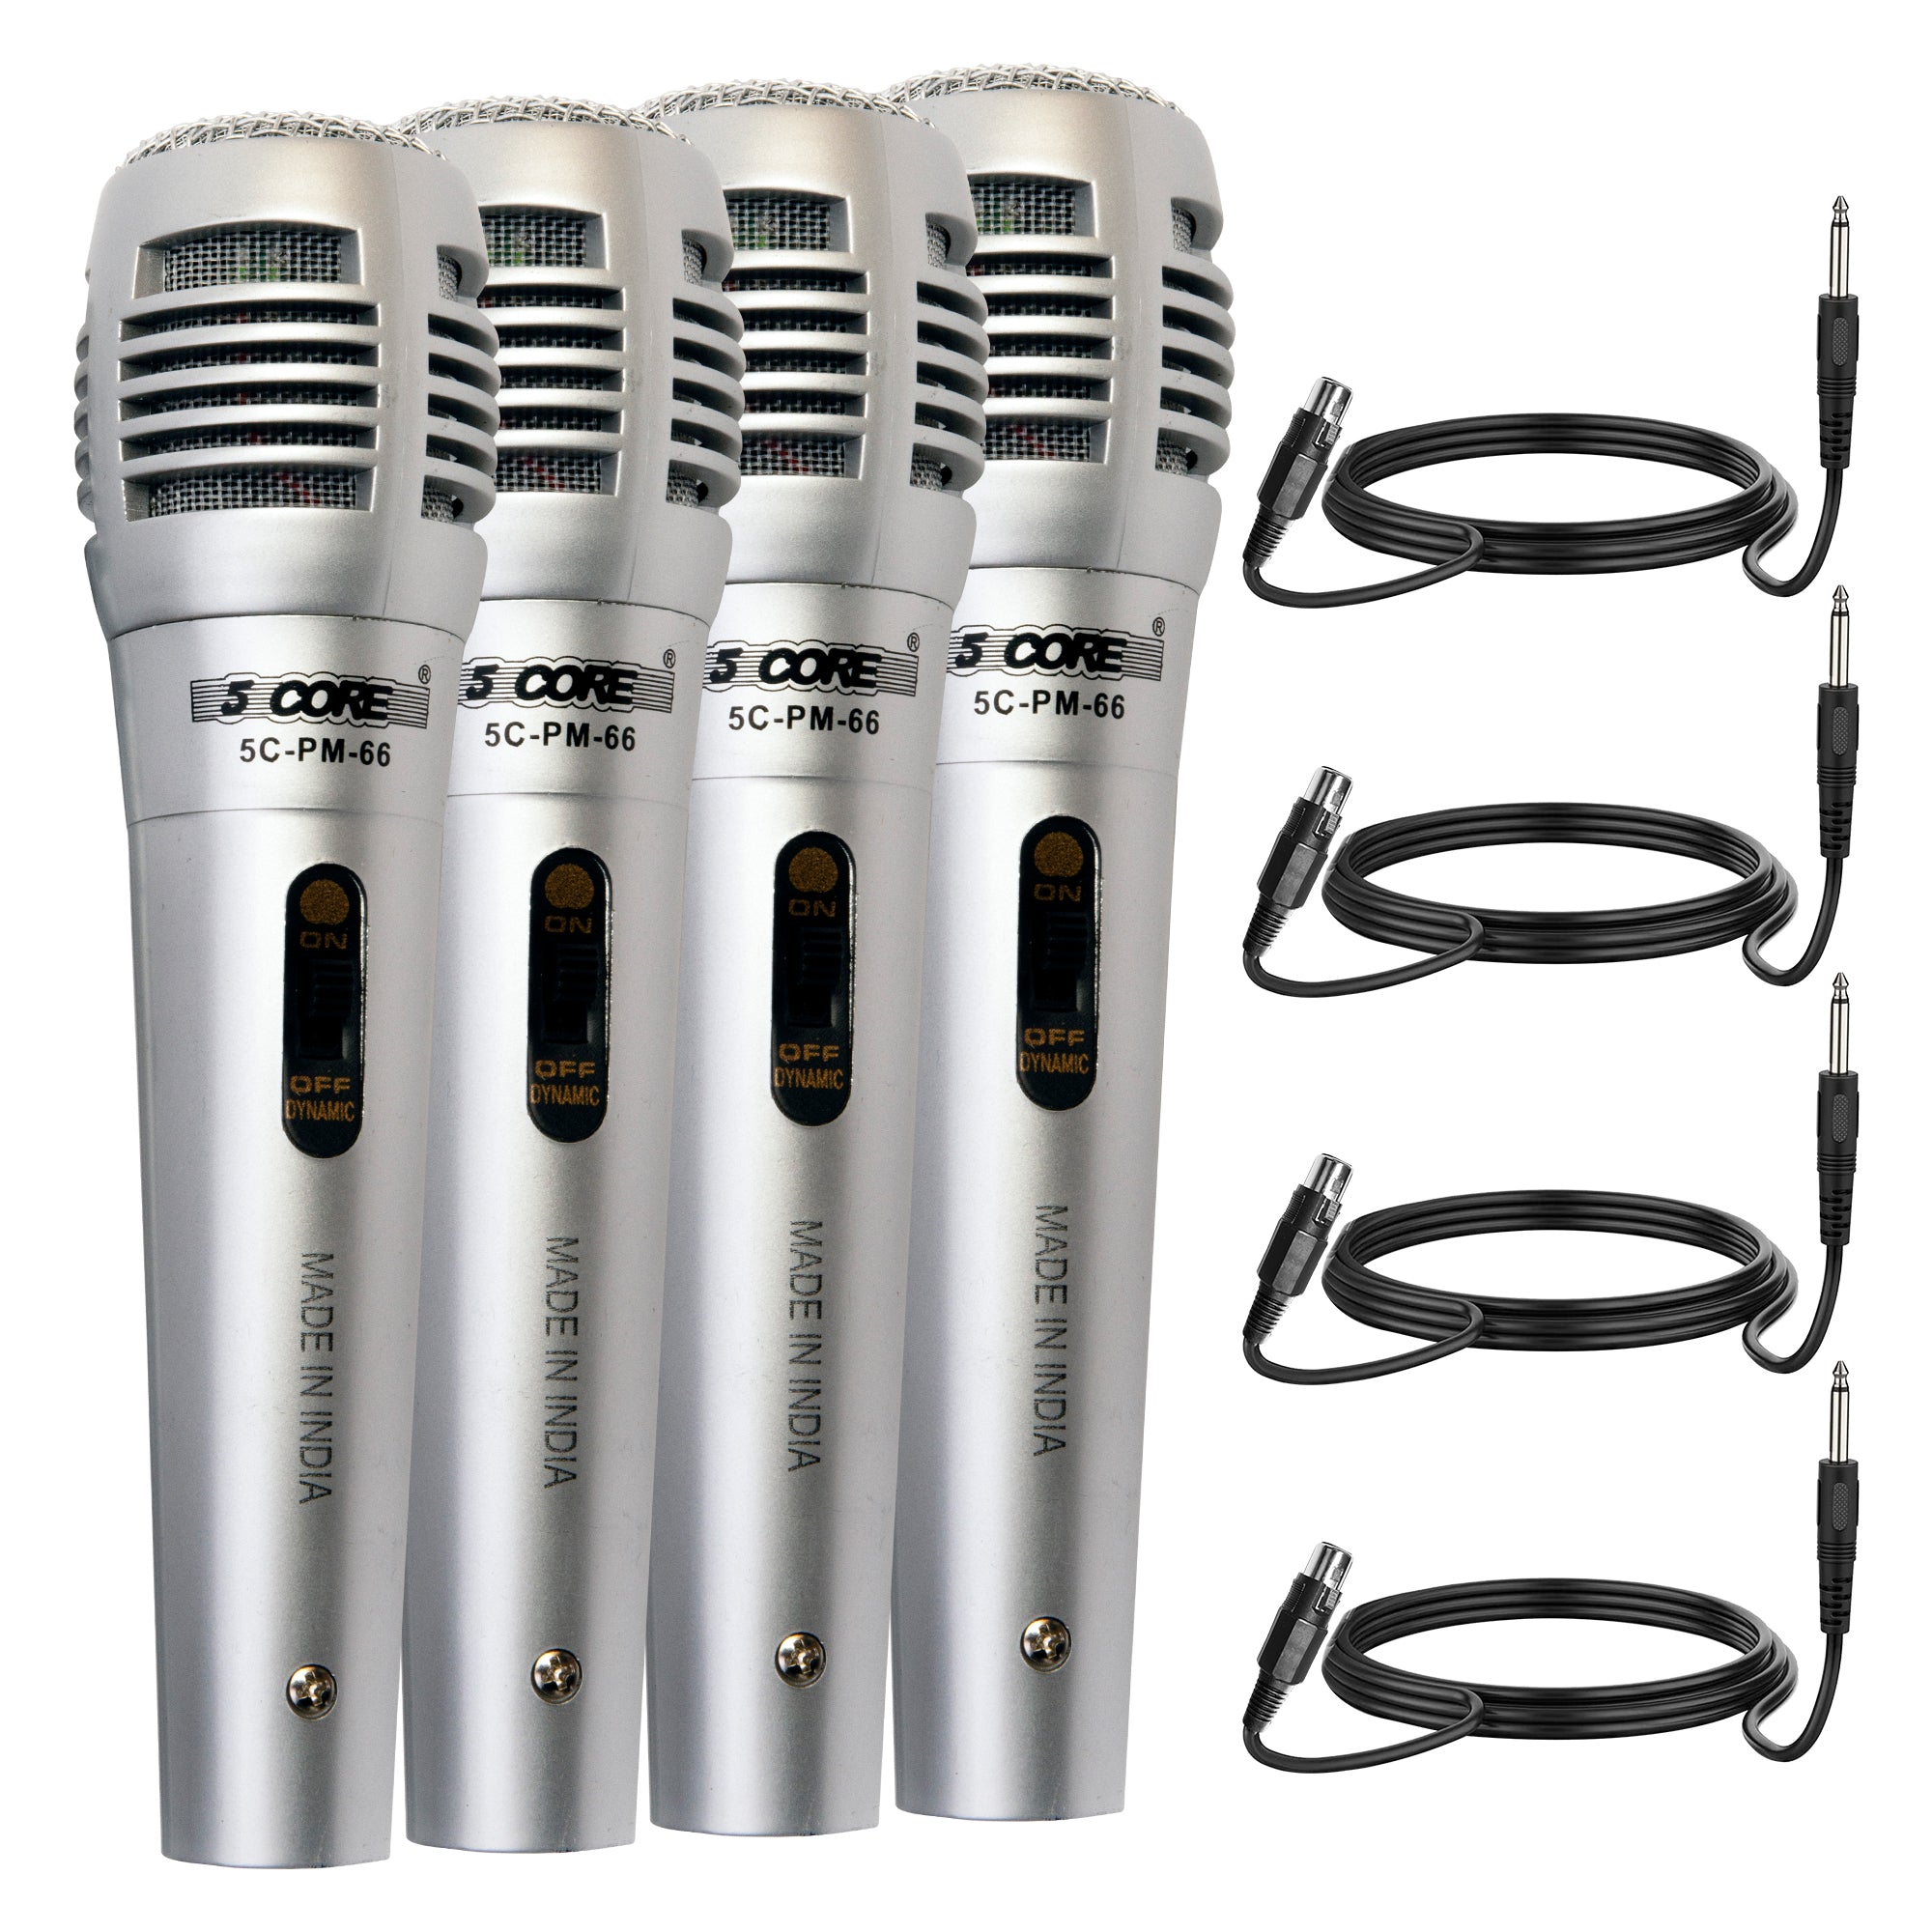 5 CORE 4 Pack Vocal Dynamic Cardioid Handheld Microphone Unidirectional Mic with On/Off Switch for Karaoke Singing (Silver) Included XLR Cable - PM-66k 2 pair